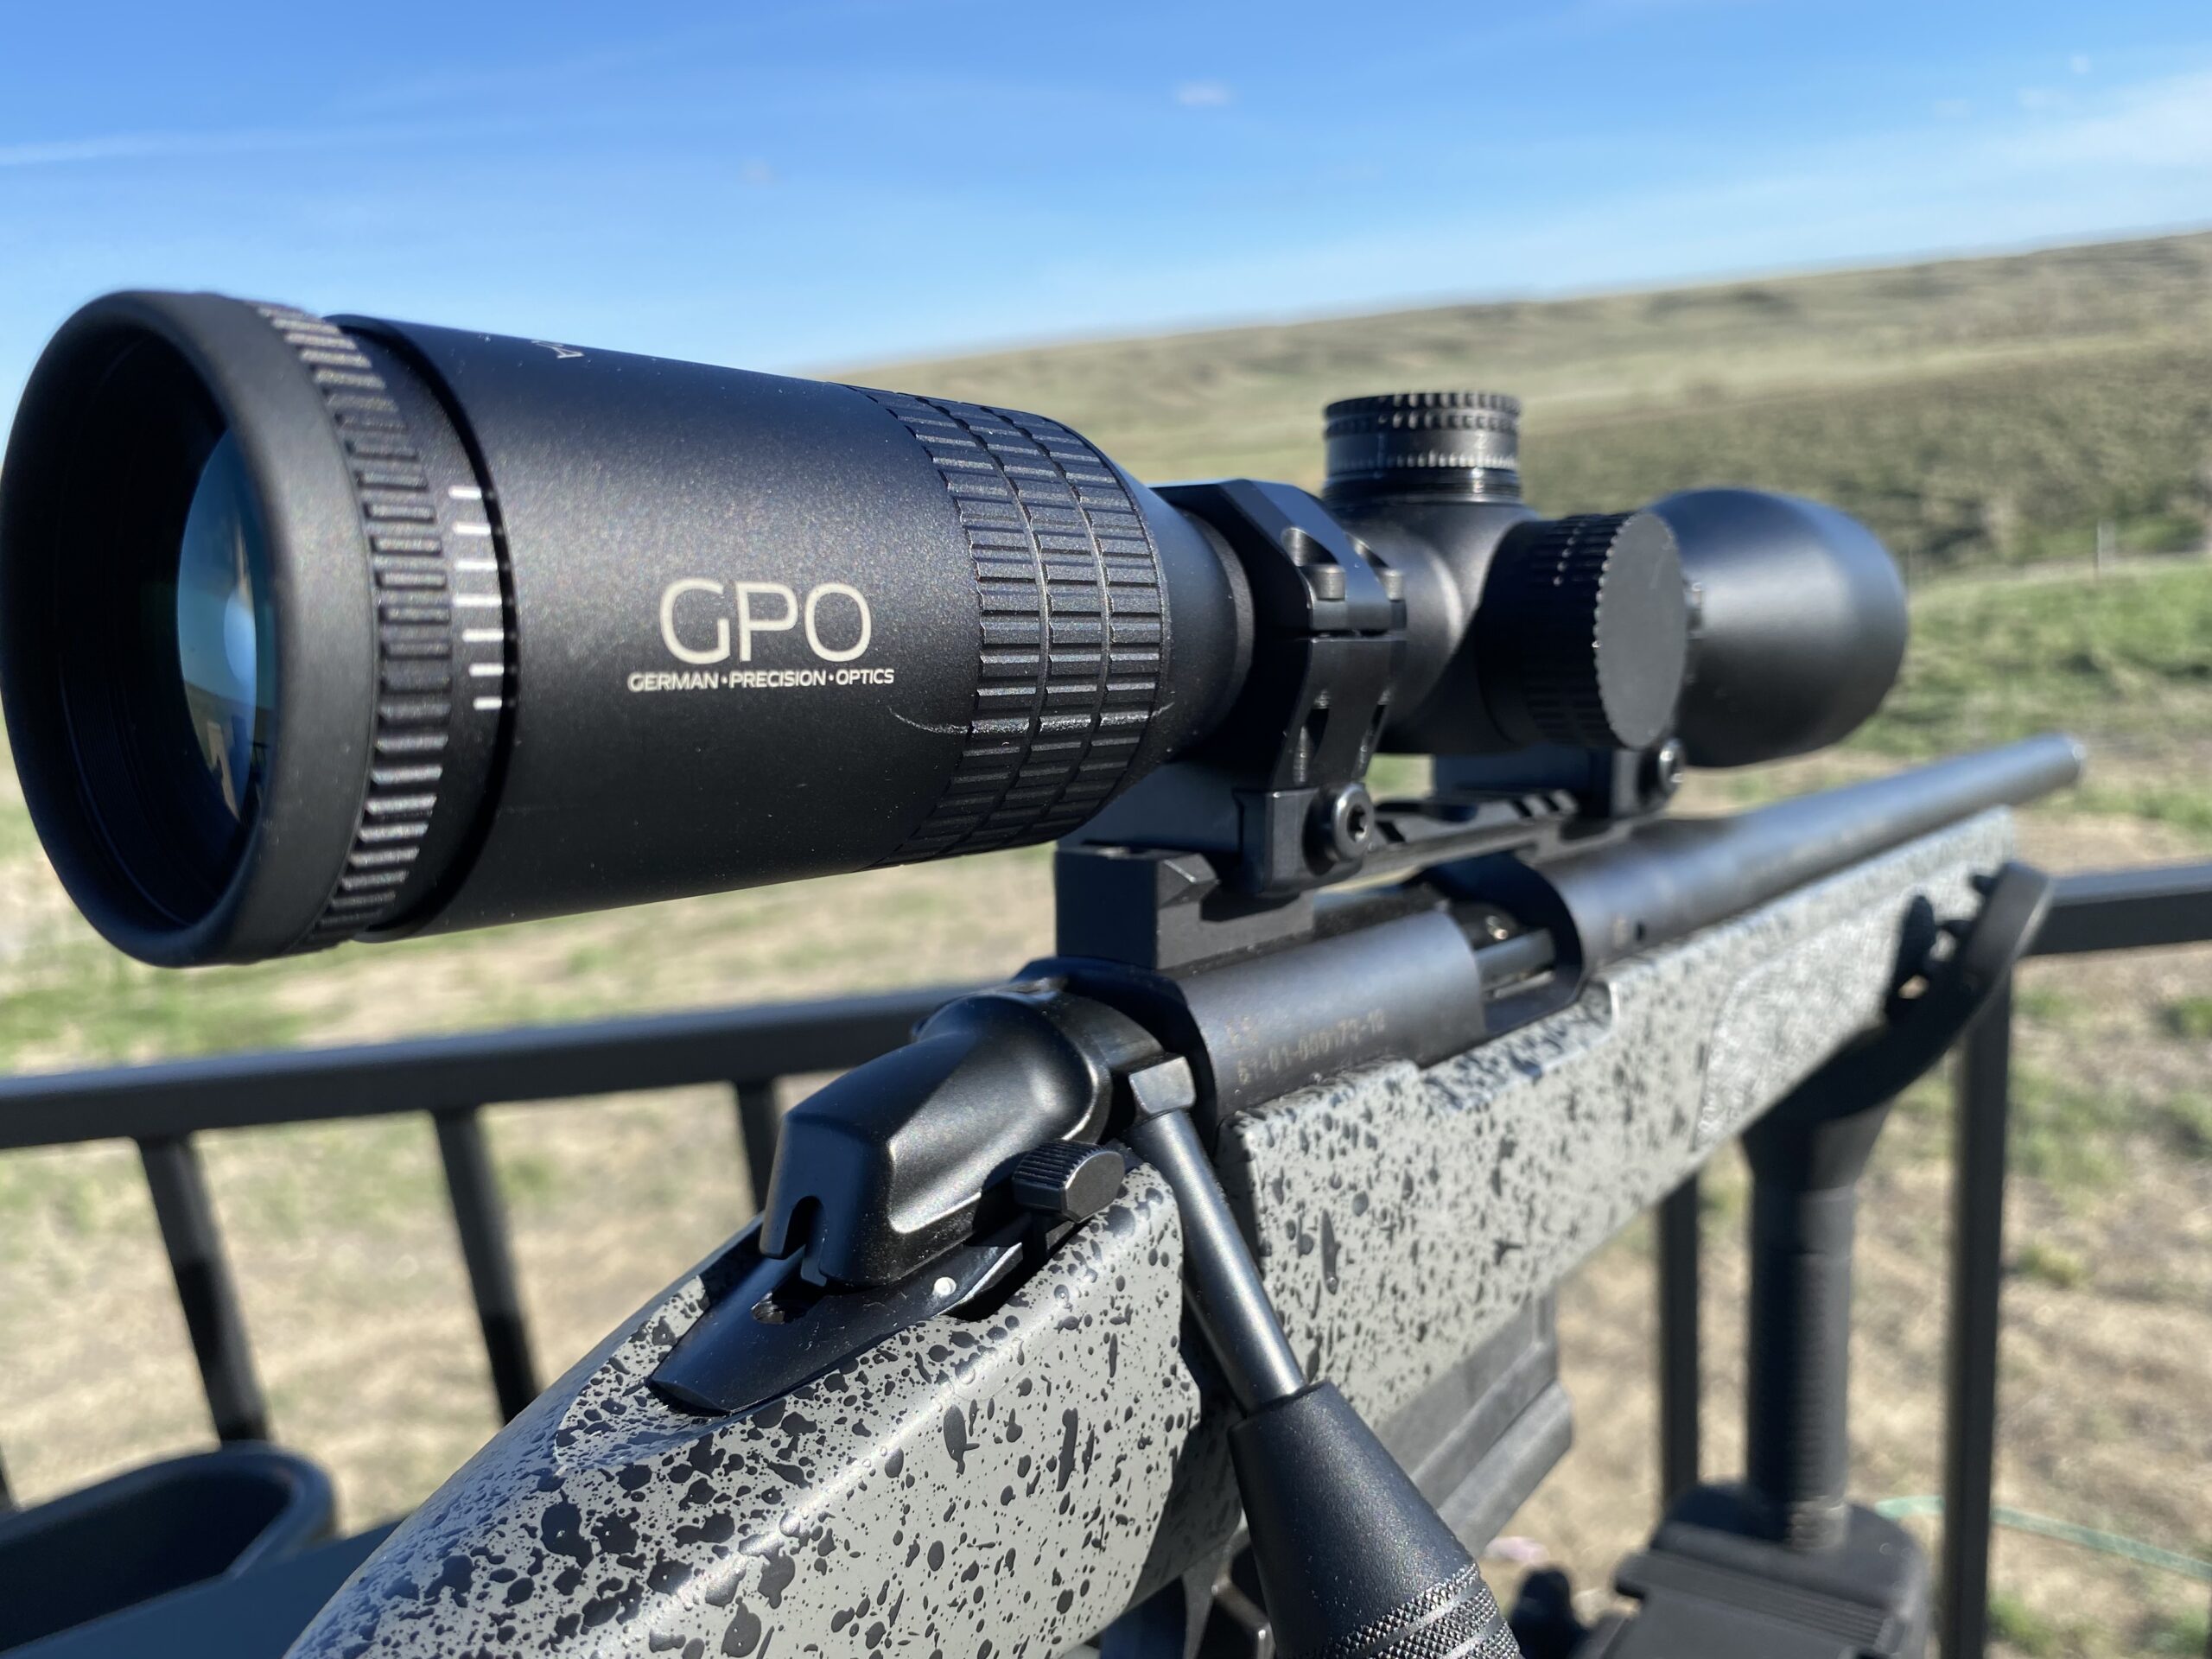 GPO rifle scope is for hunters who want a precision reticle